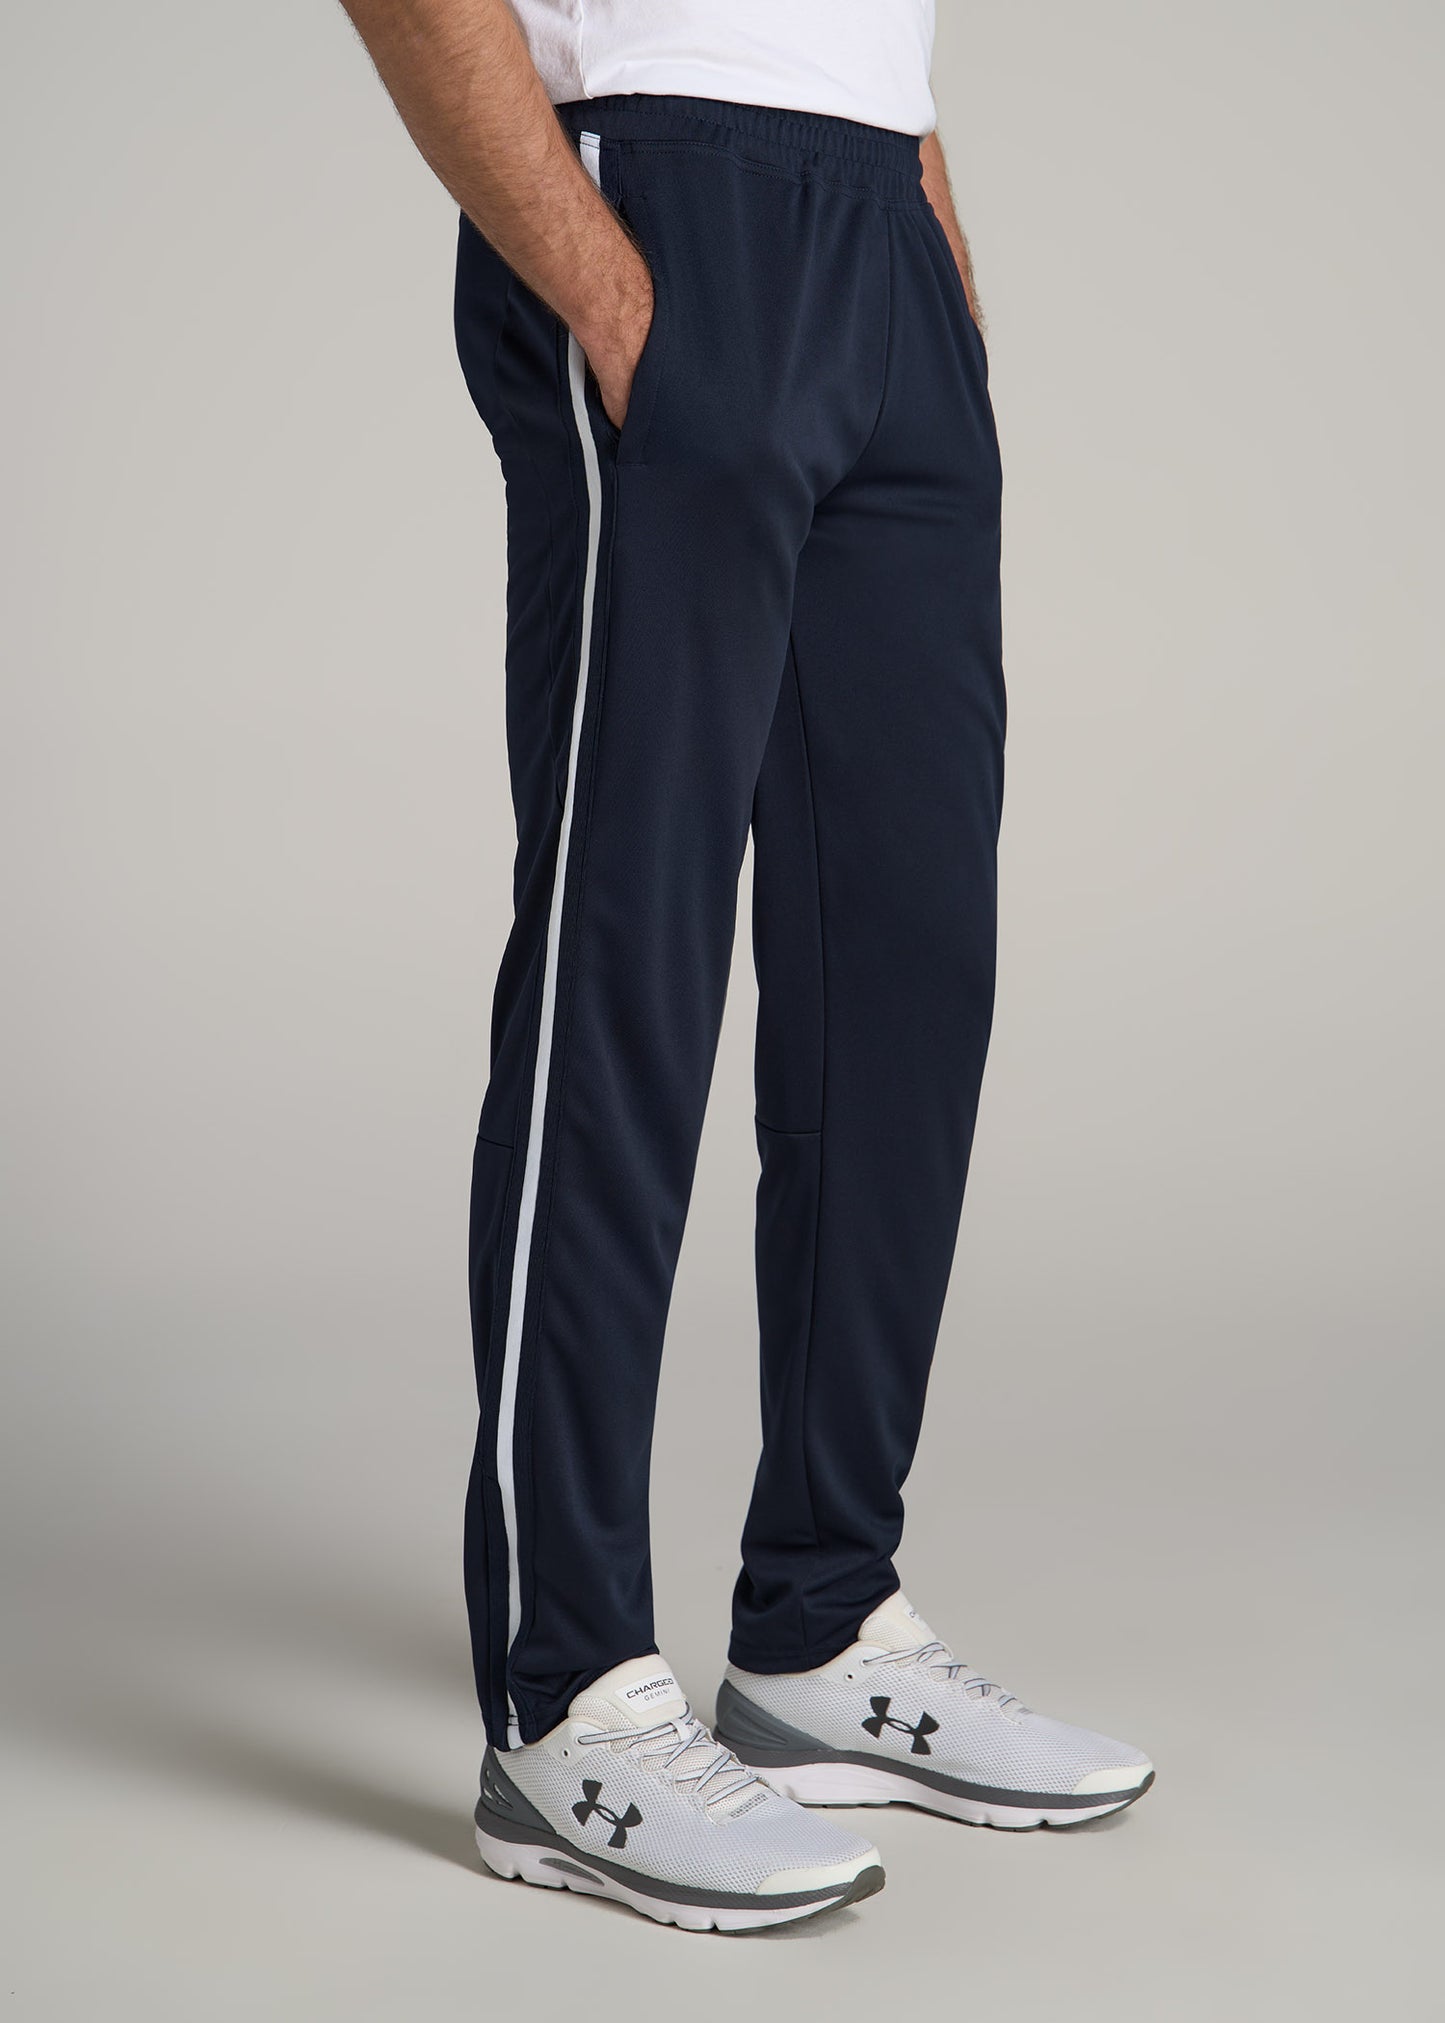 Athletic Stripe Pants for Tall Men in Navy